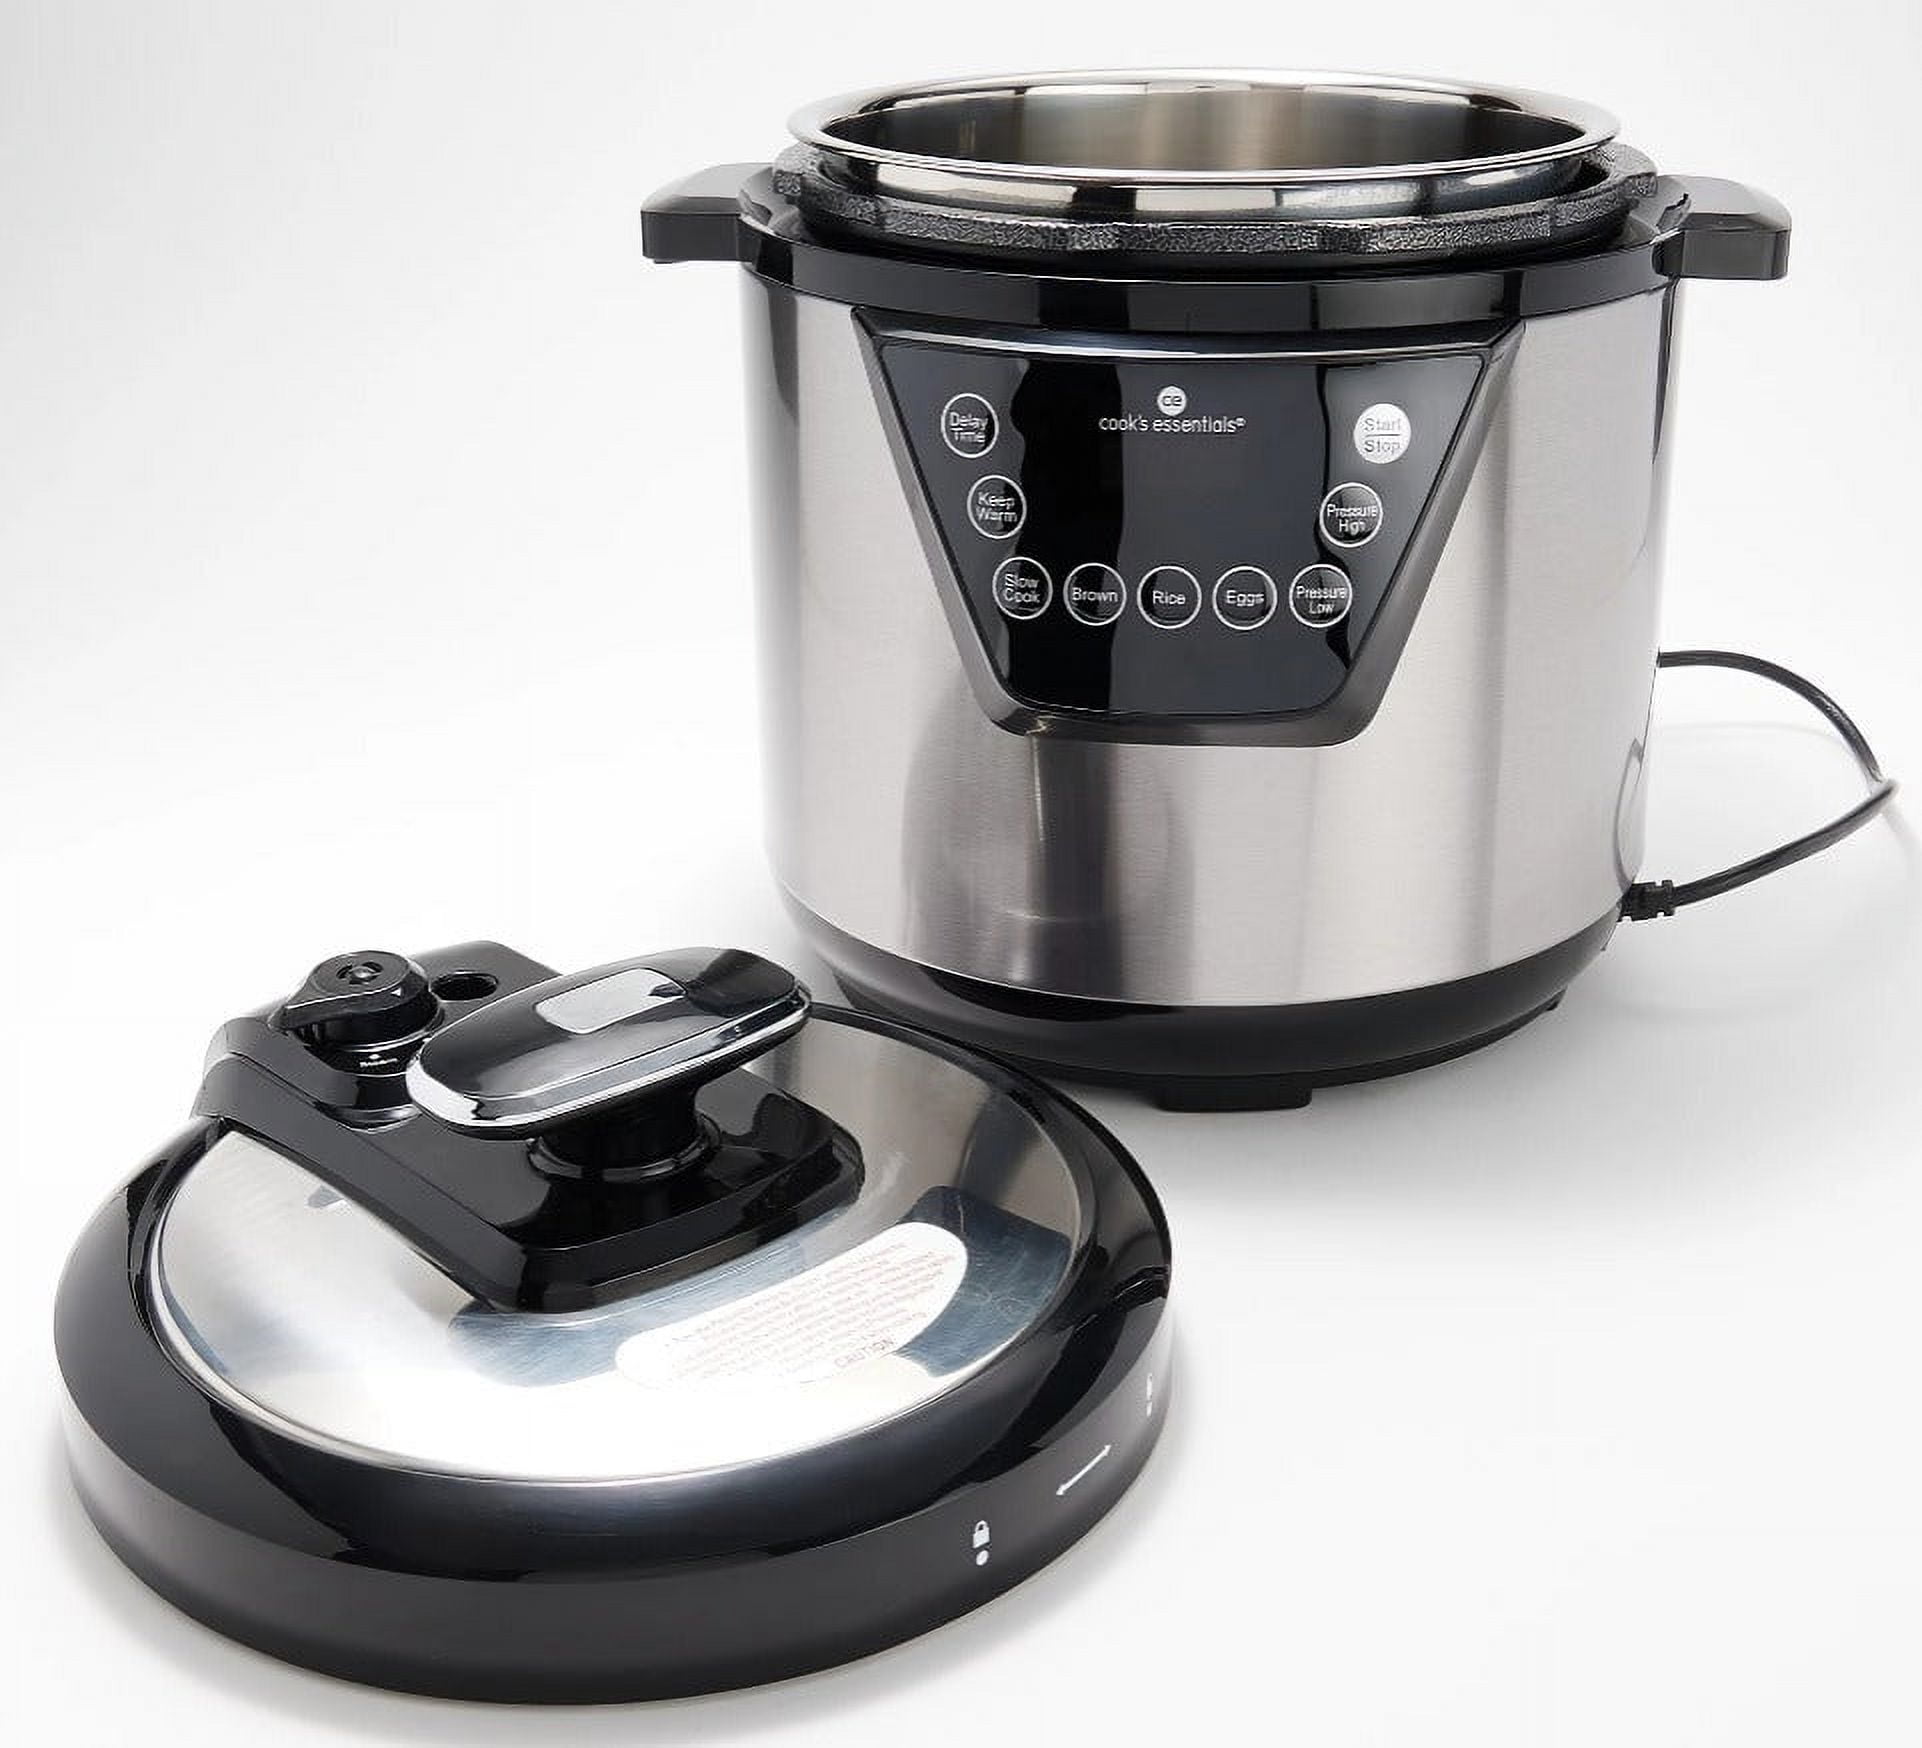 Cook's Essentials 6.3-qt Stainless Steel Pressure Cooker